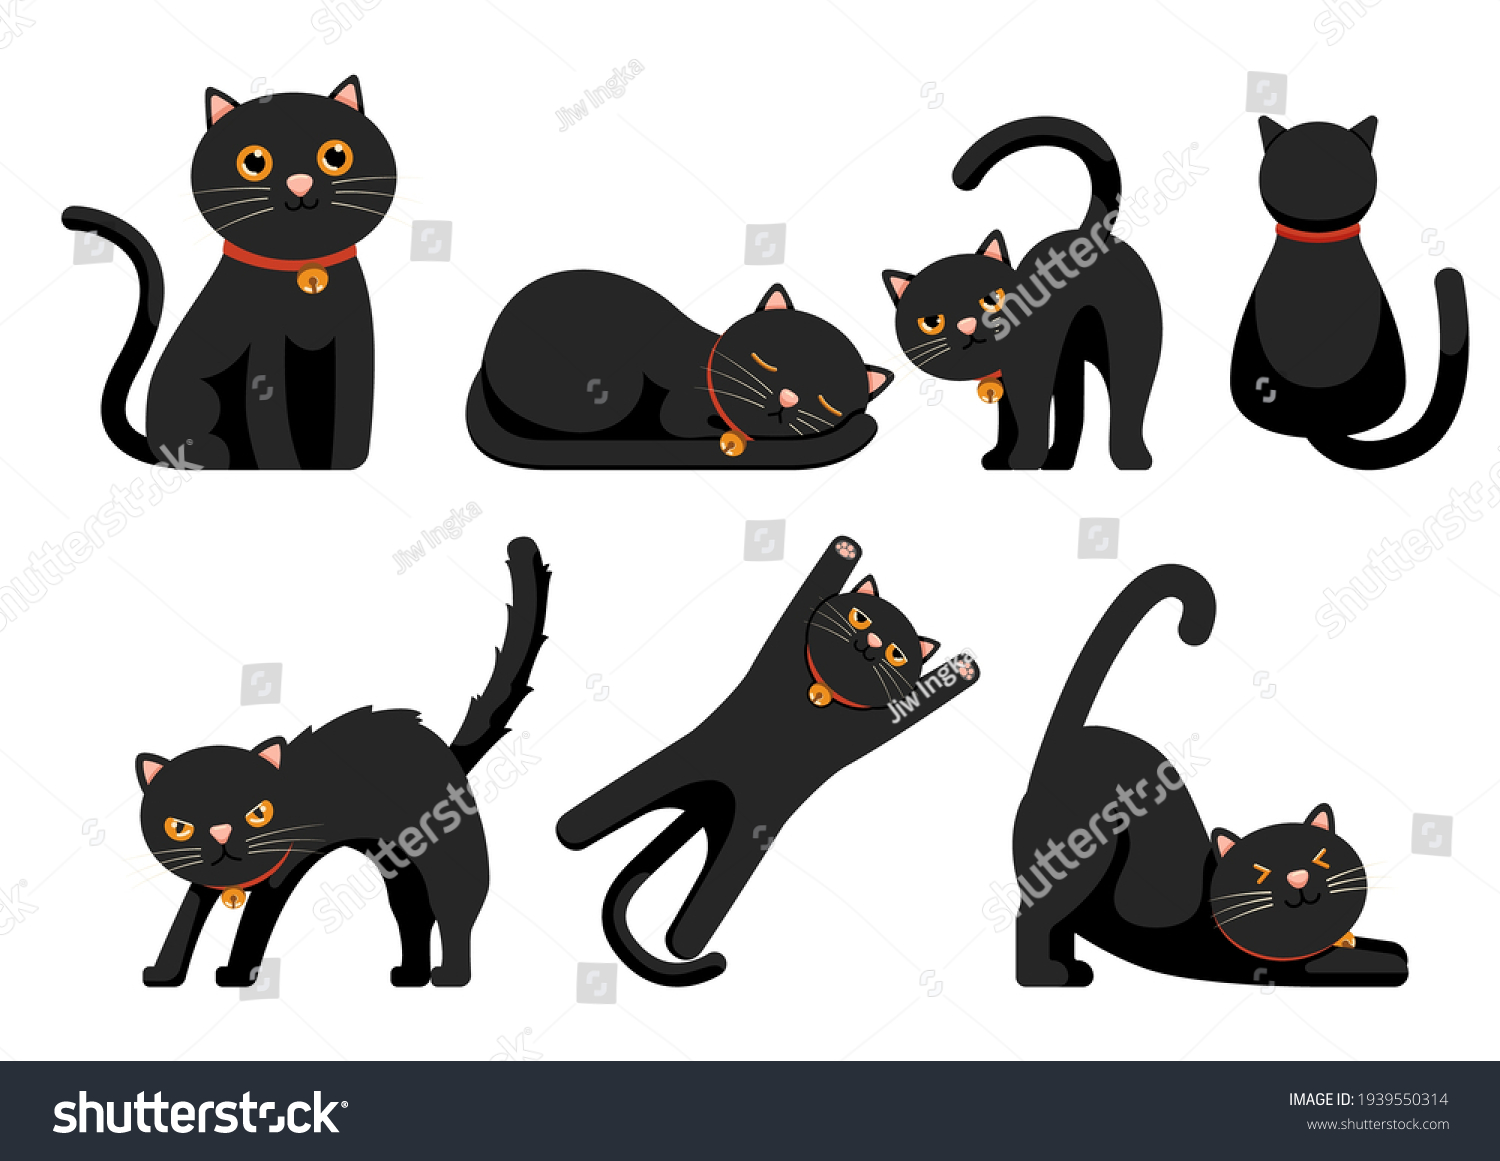 SVG of Set of Cute Black Cats Set Isolated on White Background. Funny Cartoon Animal Characters svg